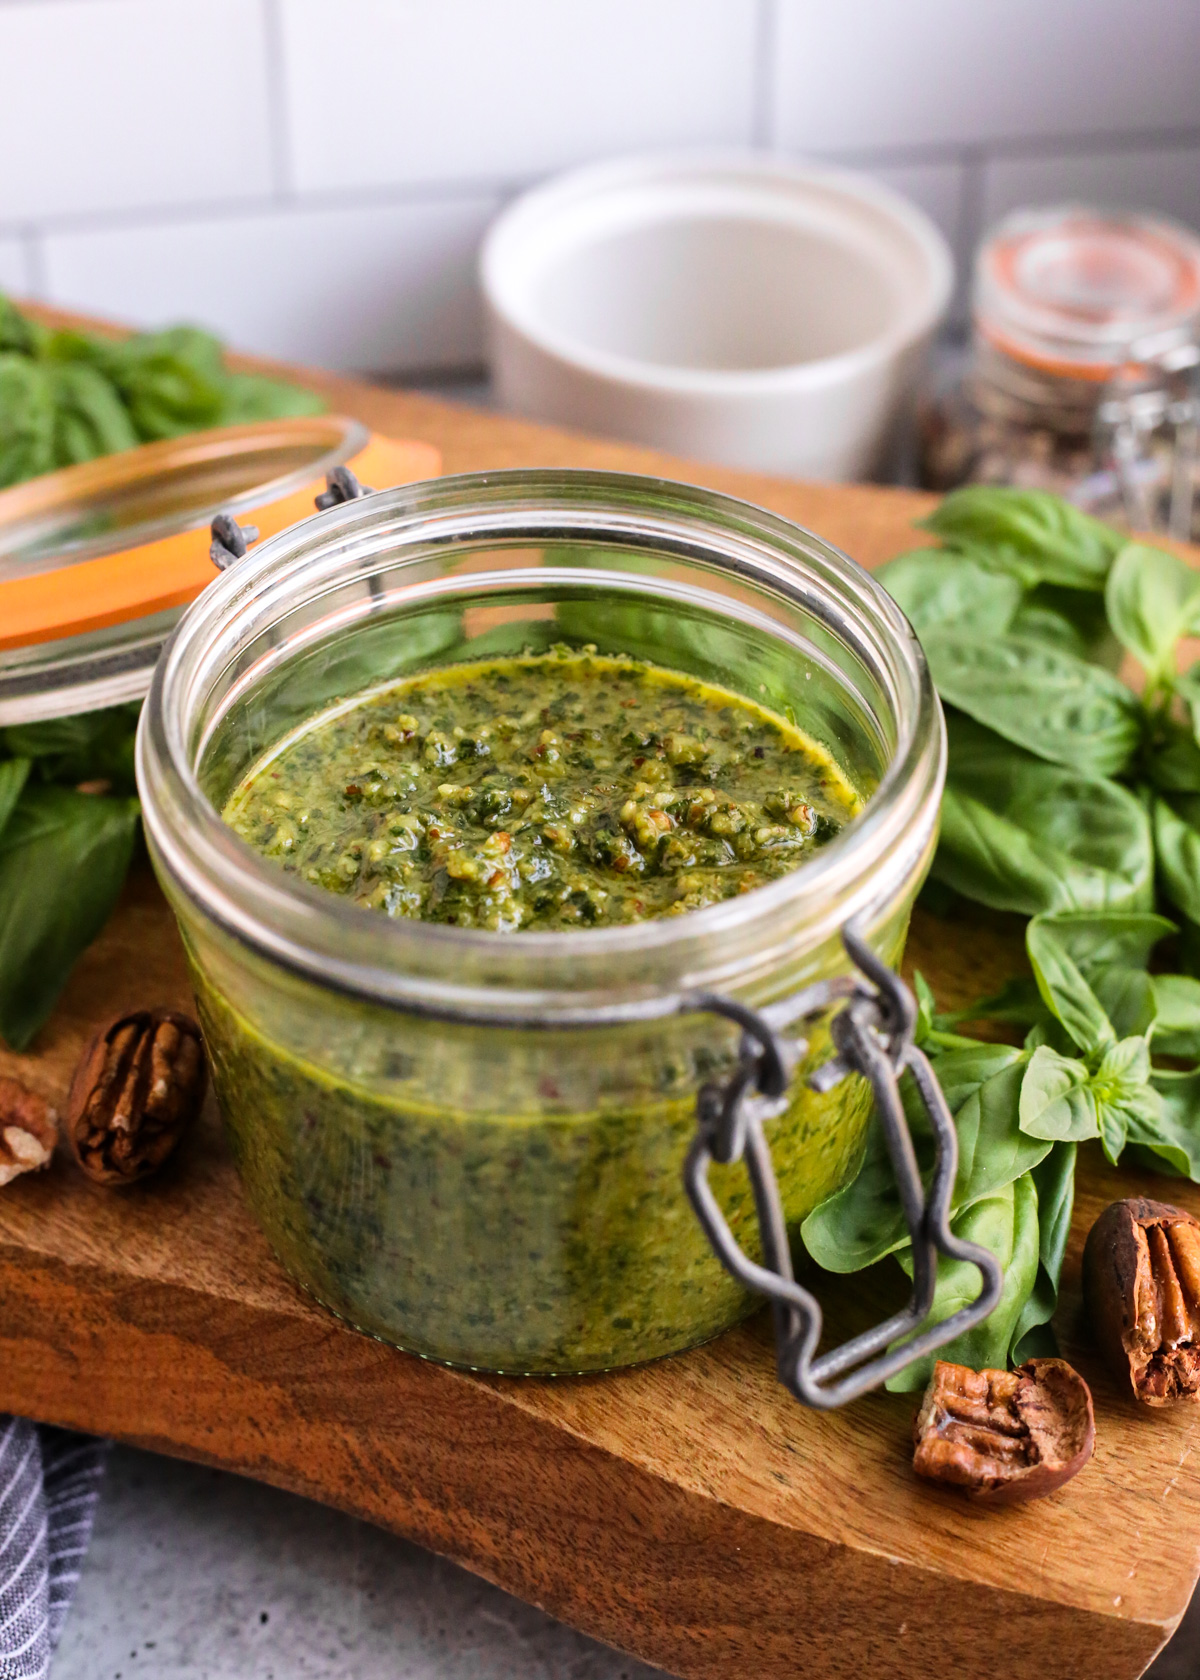 A view of a freshly made batch of homemade basil pecan pesto in a glass jar, displayed on a wooden serving tray on a kitchen countertop and surrounded by shelled pecans and fresh basil leaves